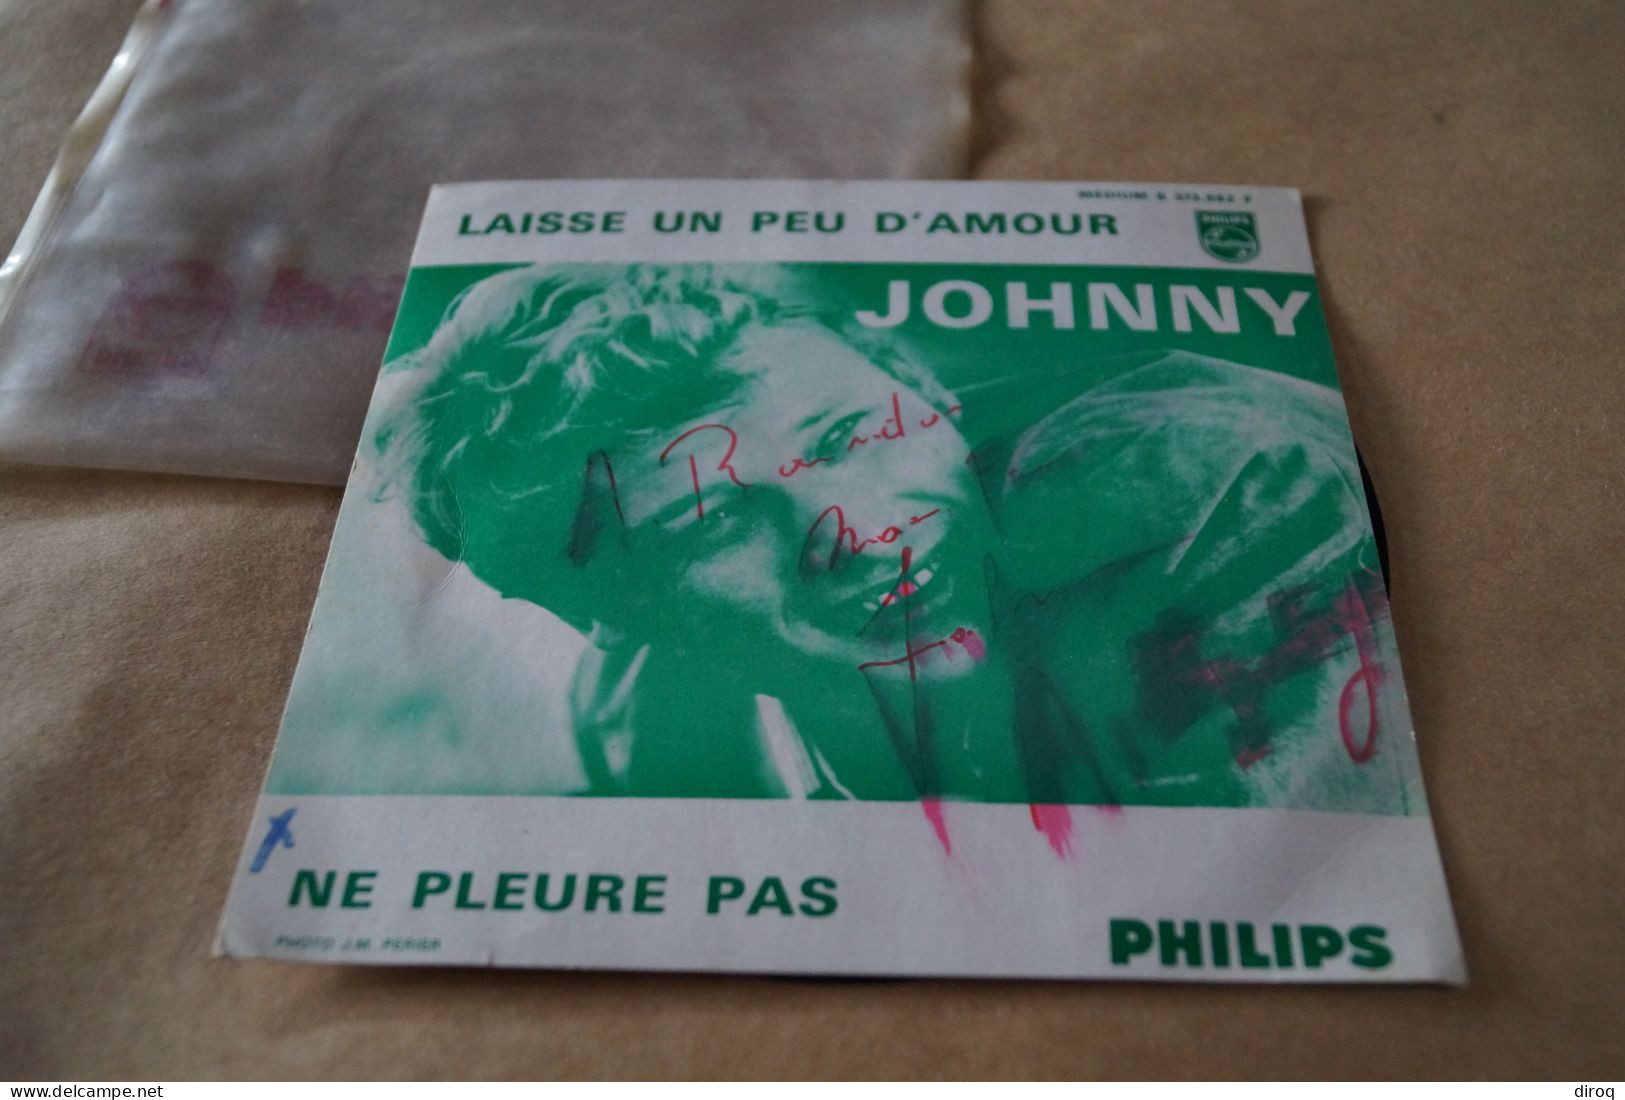 RARE 45 T.de Johnny Halliday Dédicacé,BE373.662.F,pour Collection - Other - French Music